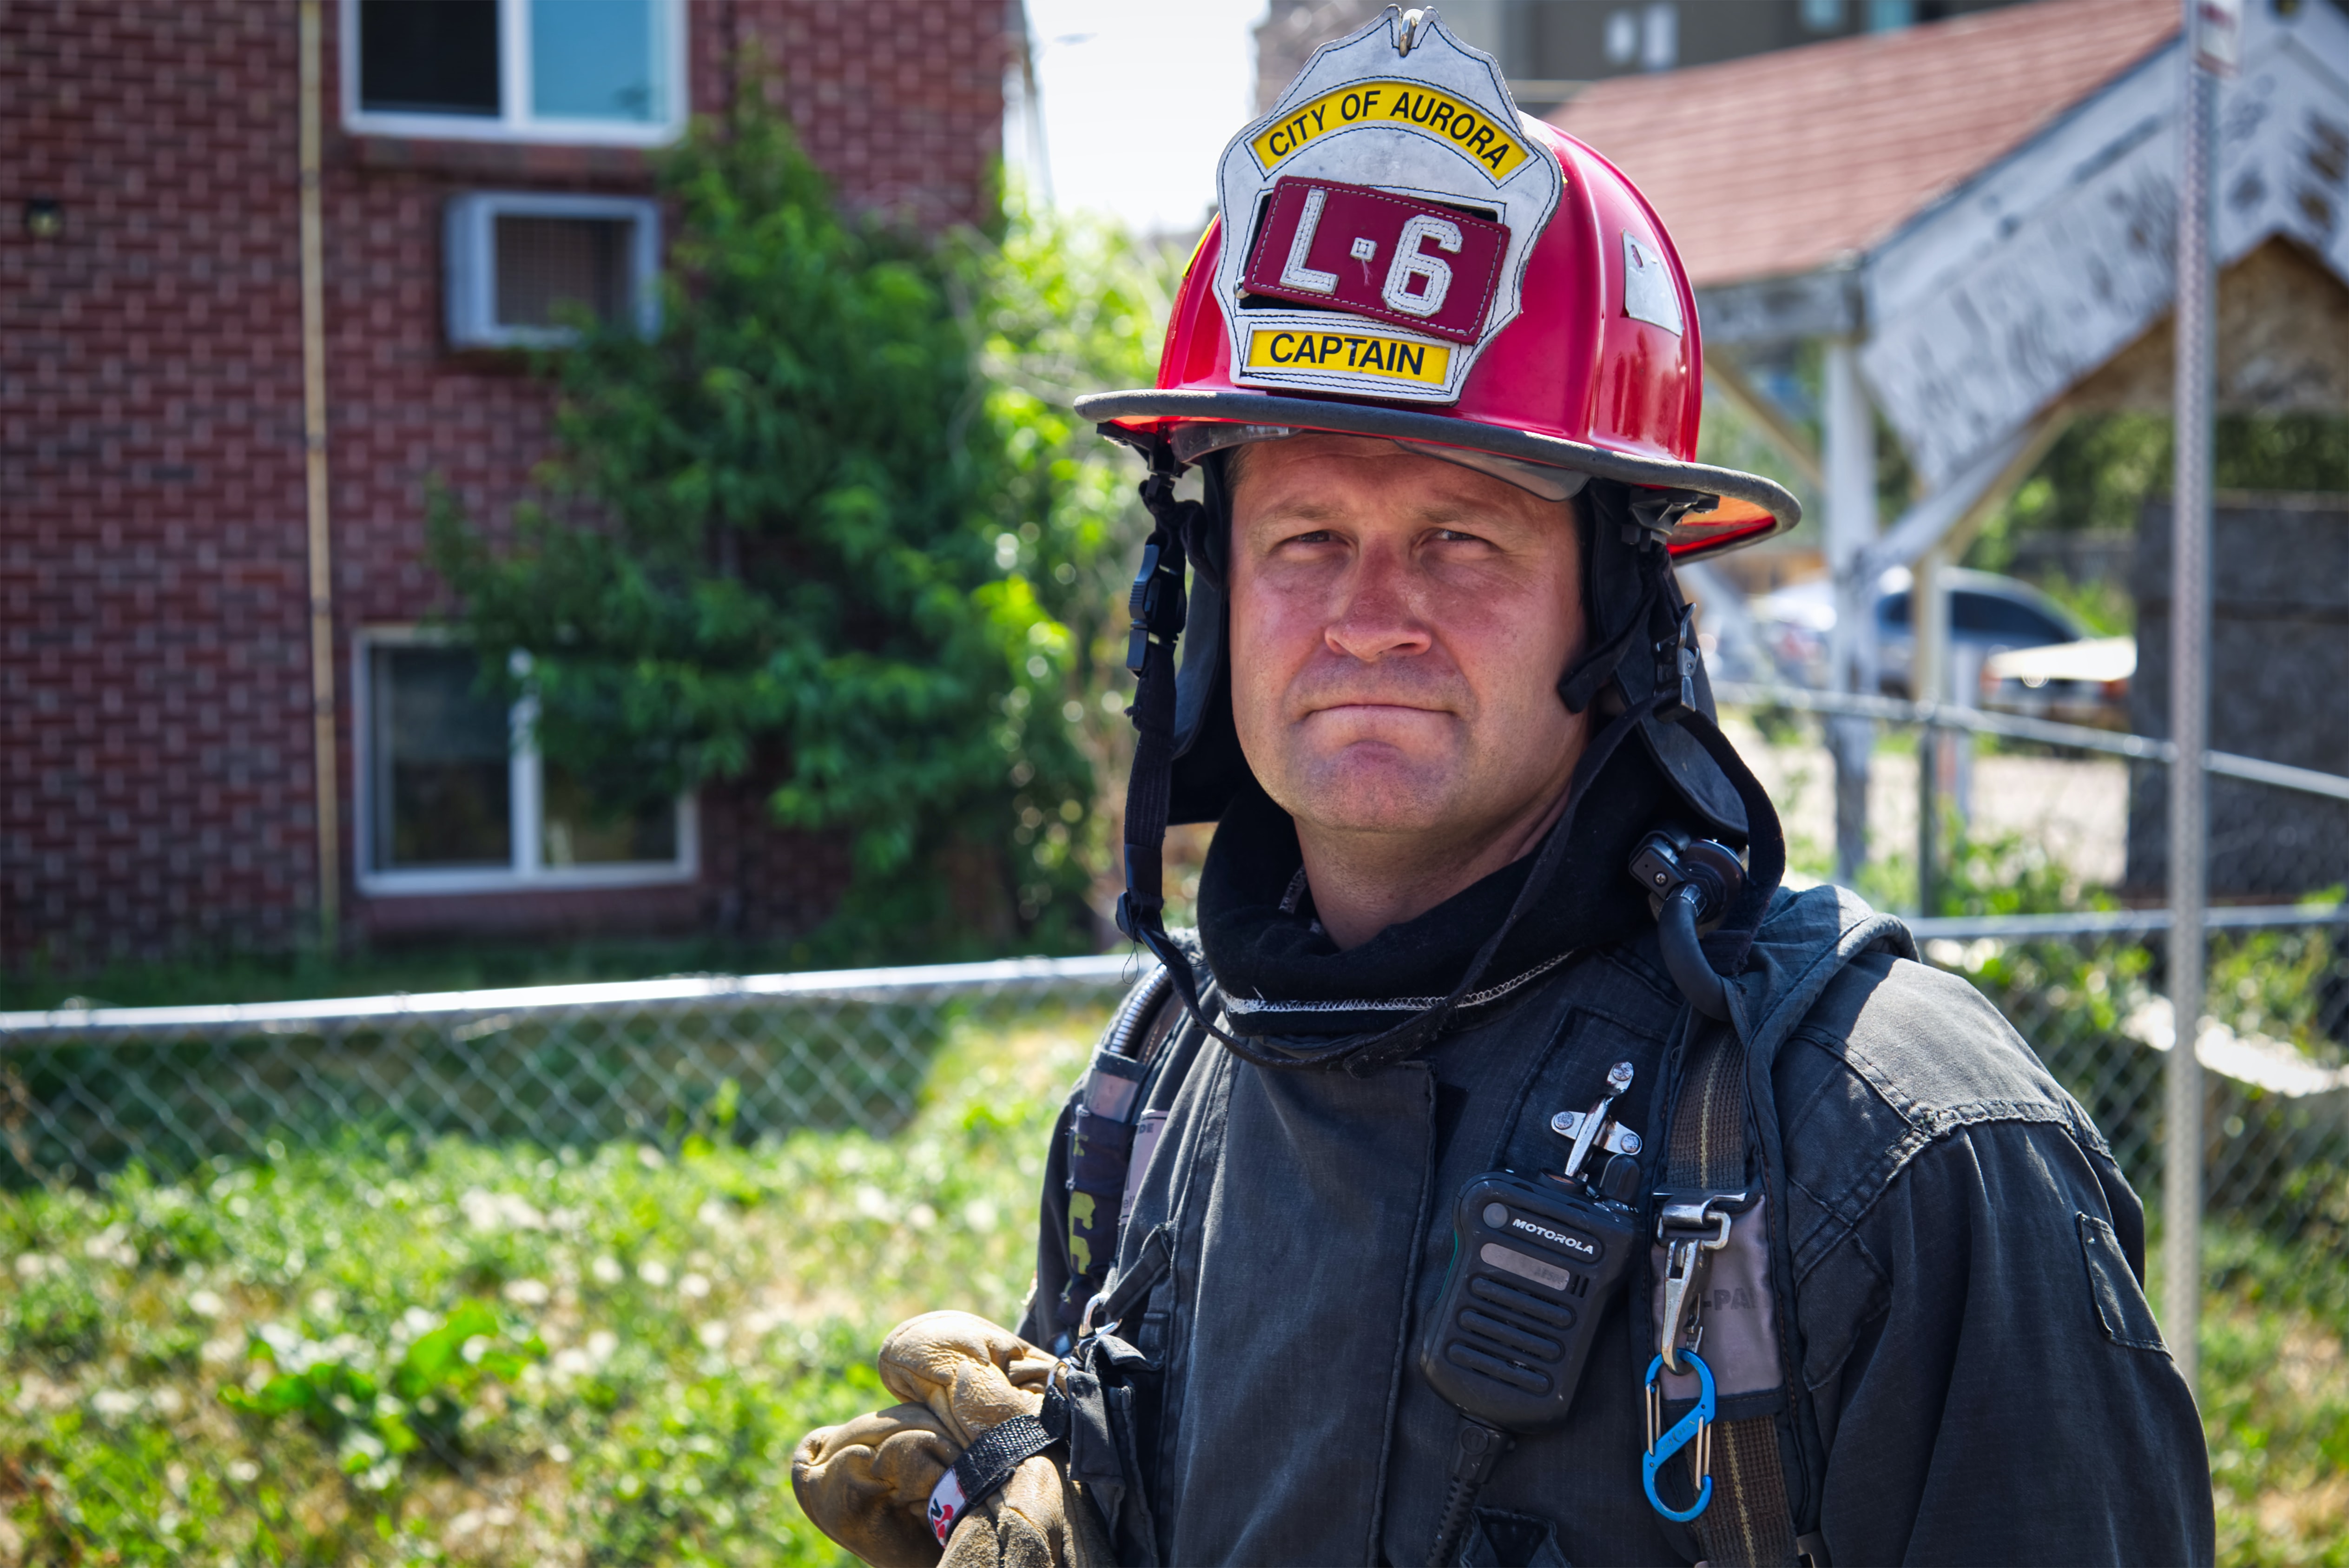 Fire captain with hat and coat on standing in front of a brick house.